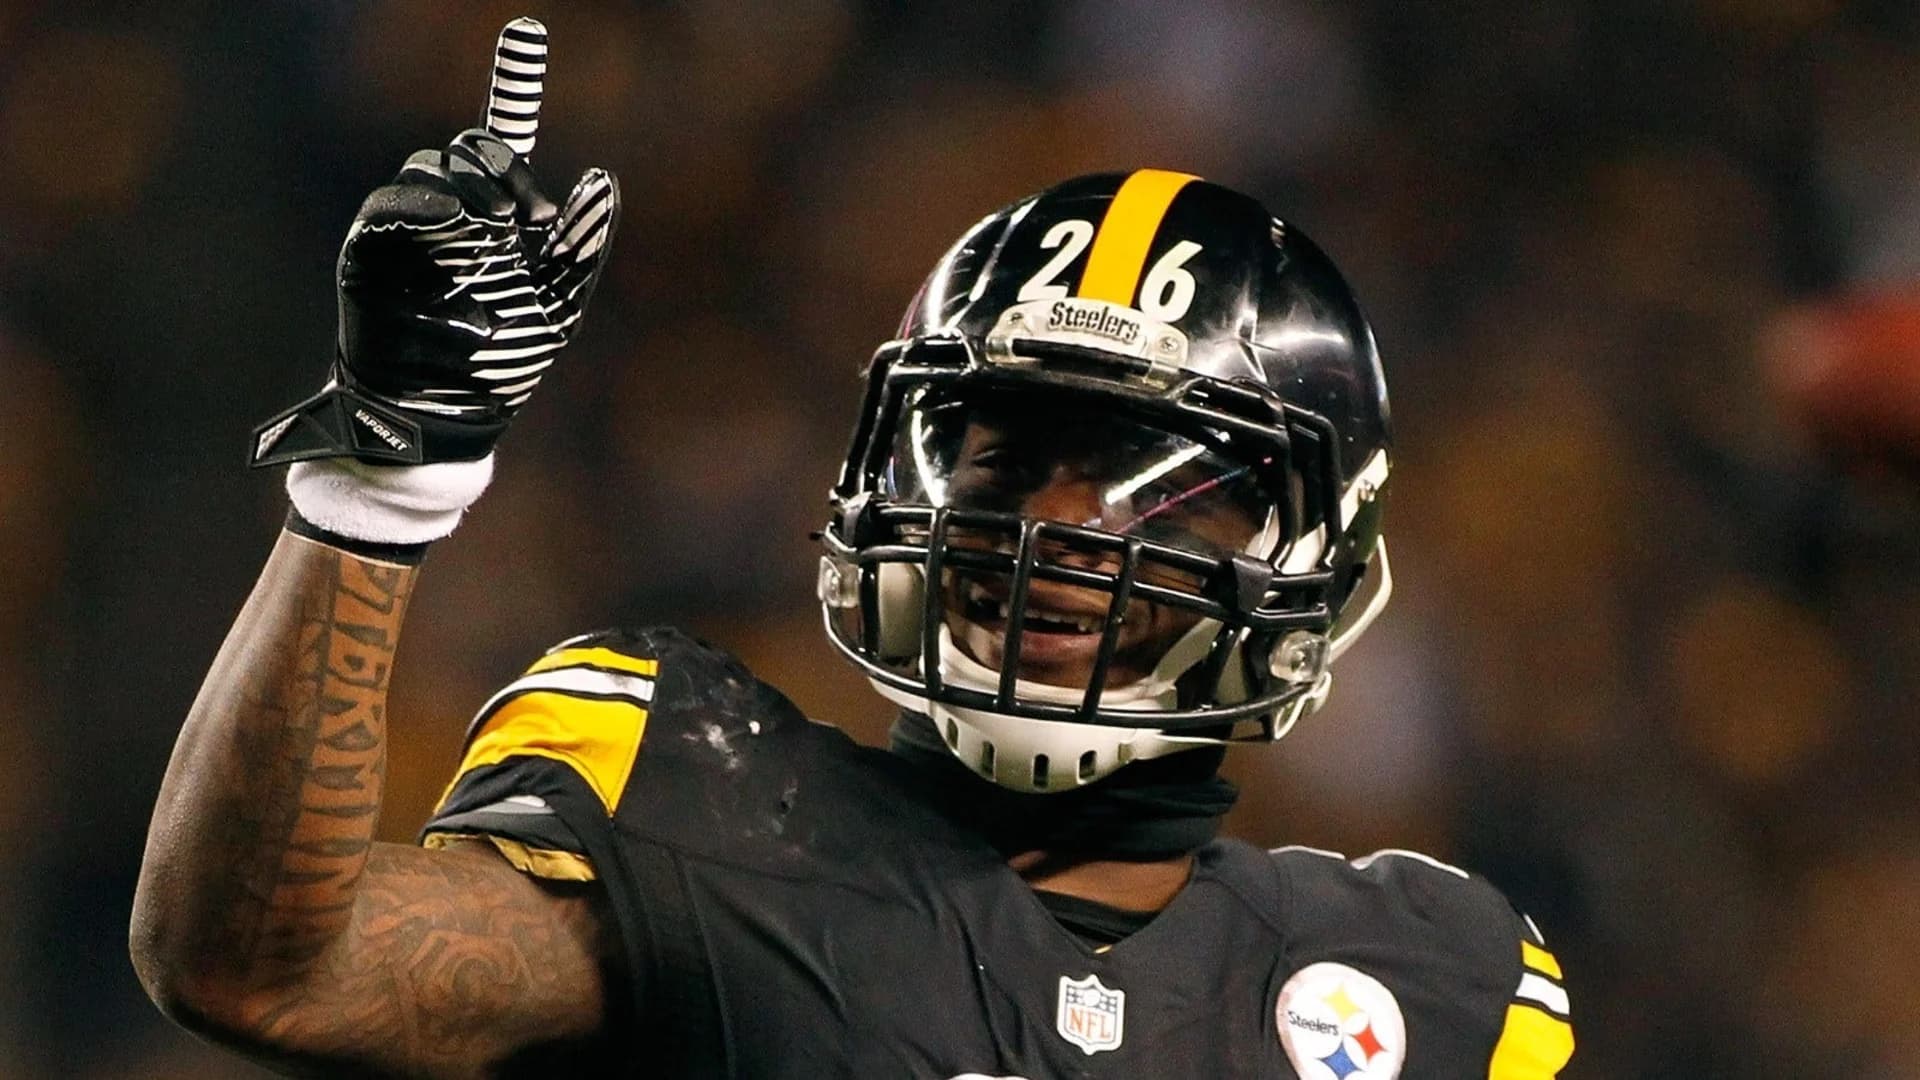 AP source: Jets agree to sign RB Le'Veon Bell